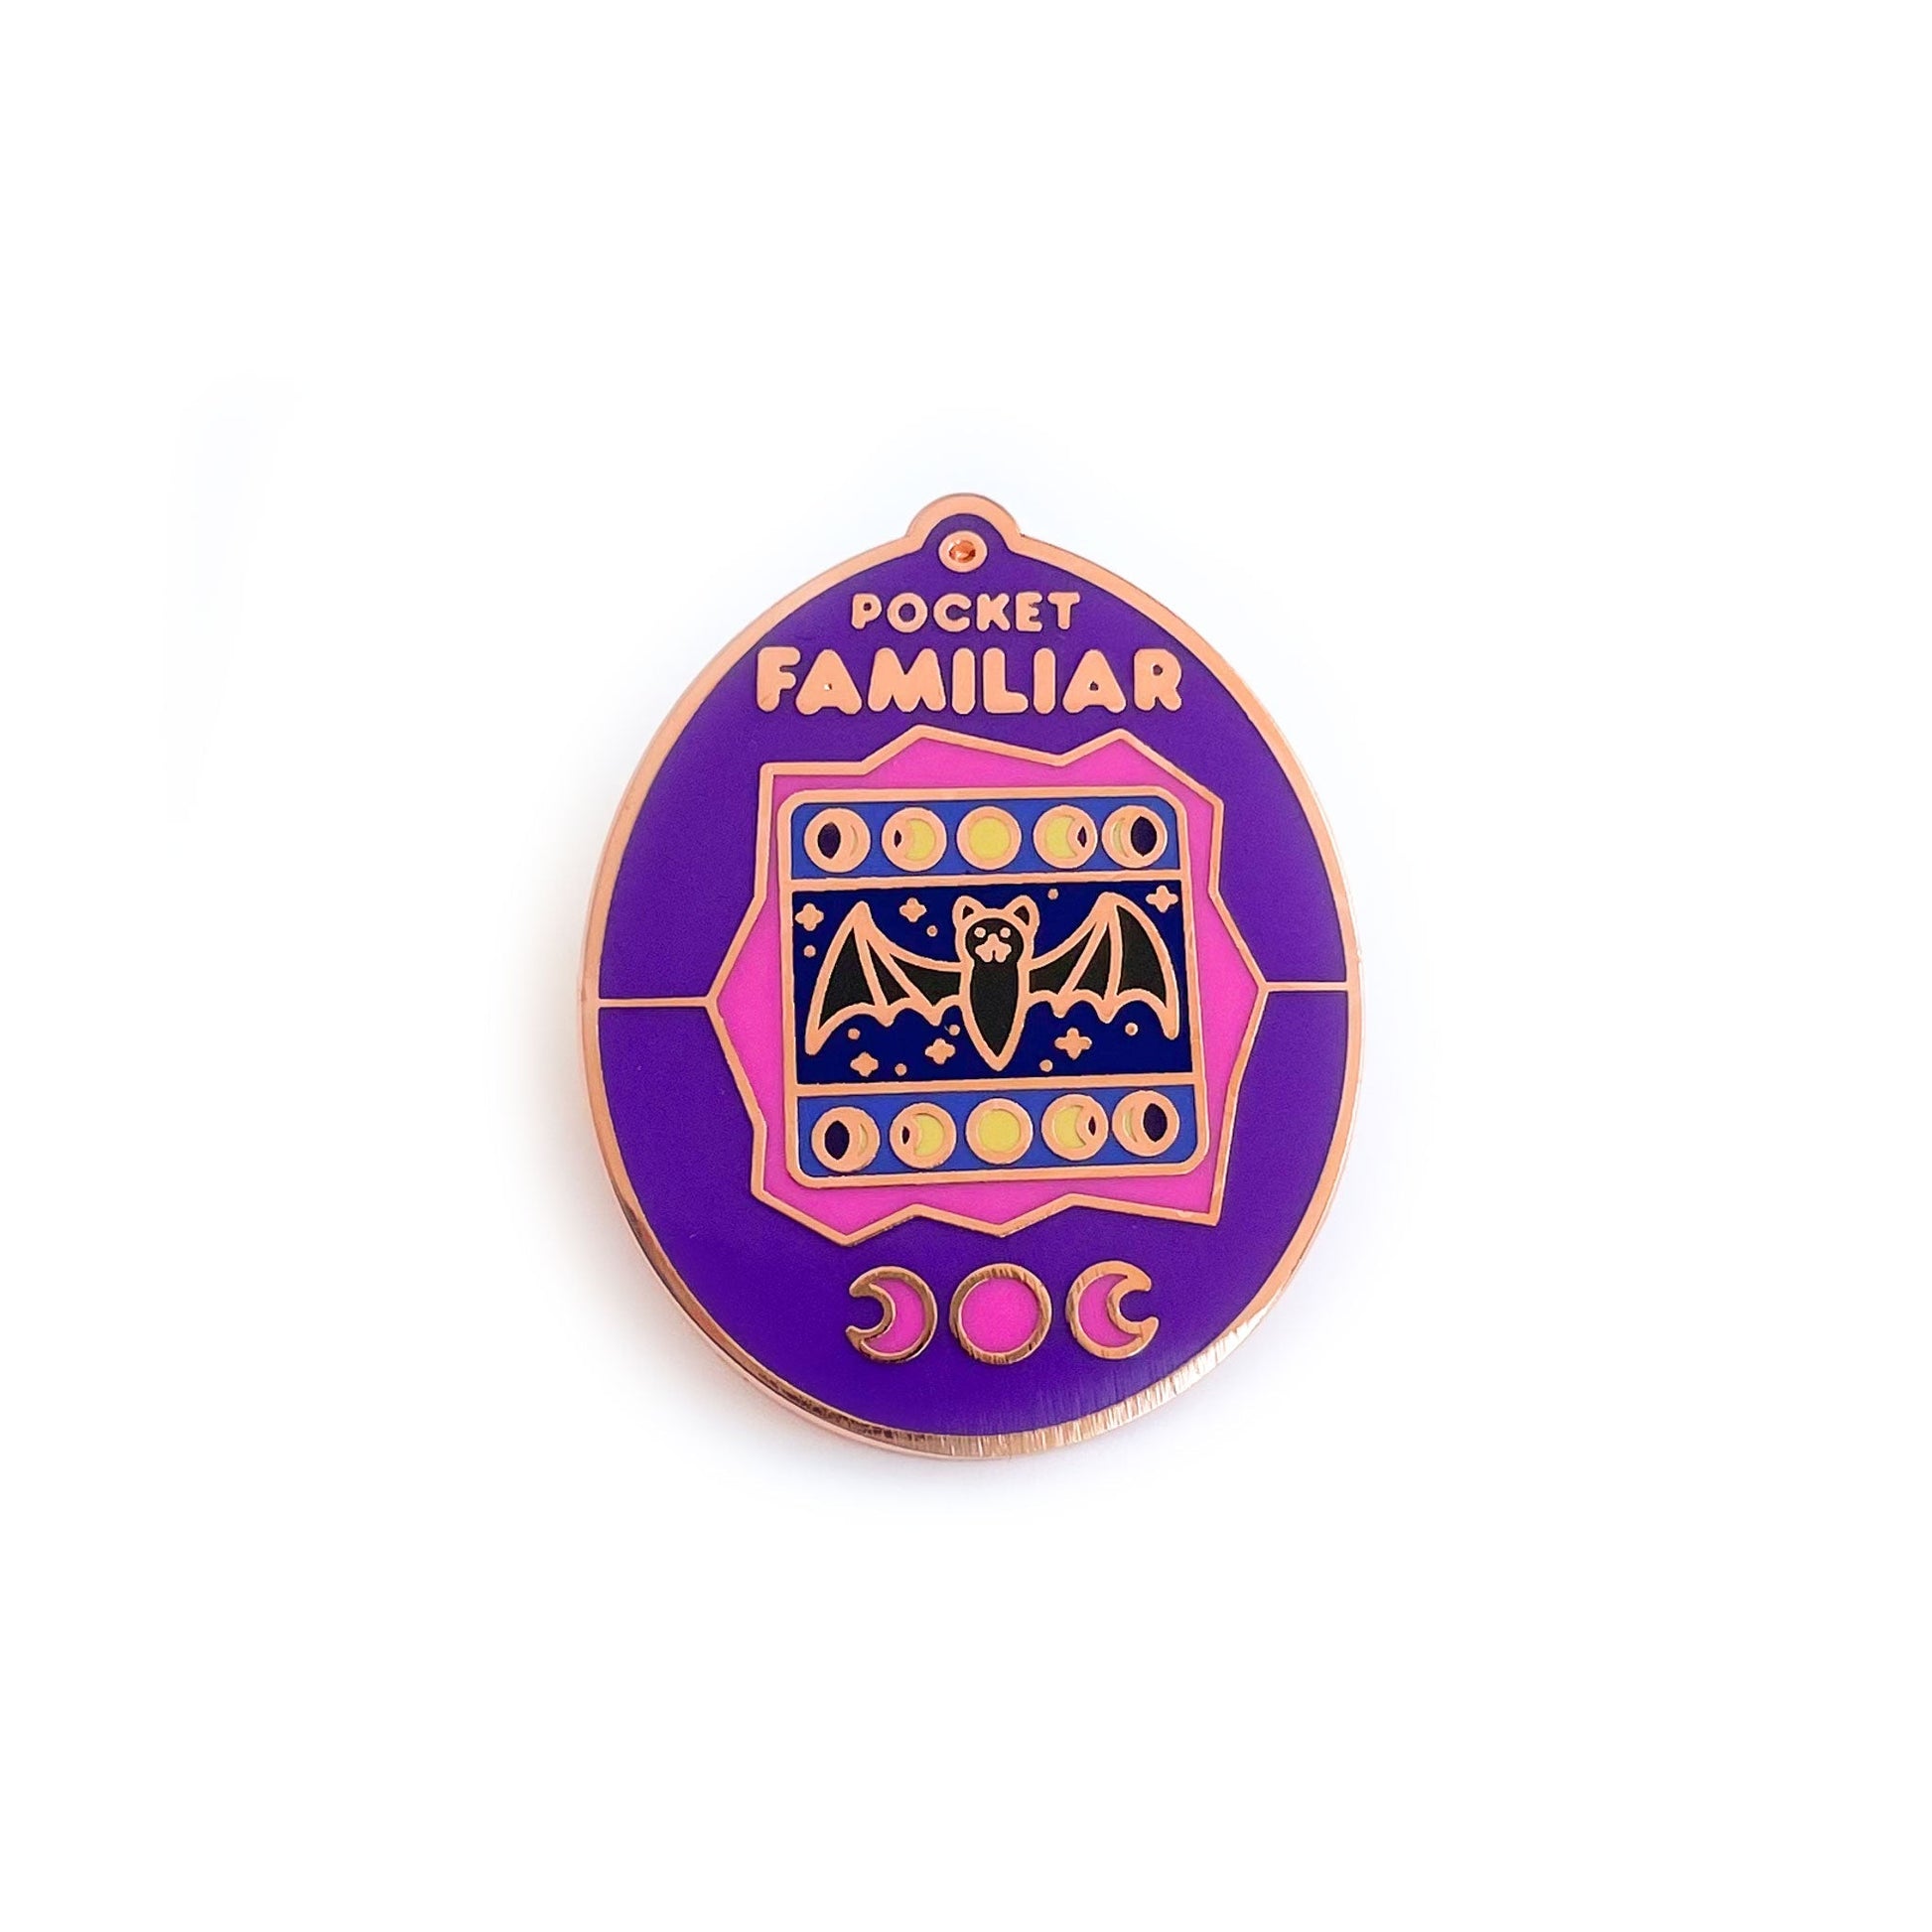 An enamel pin shaped like a Tamagotchi that reads "Pocket Familiar" at the top. It has a pink and purple shell. The screen has moon phases and a bat with night stars by it. The buttons of the tamagotchi are moon phases. 